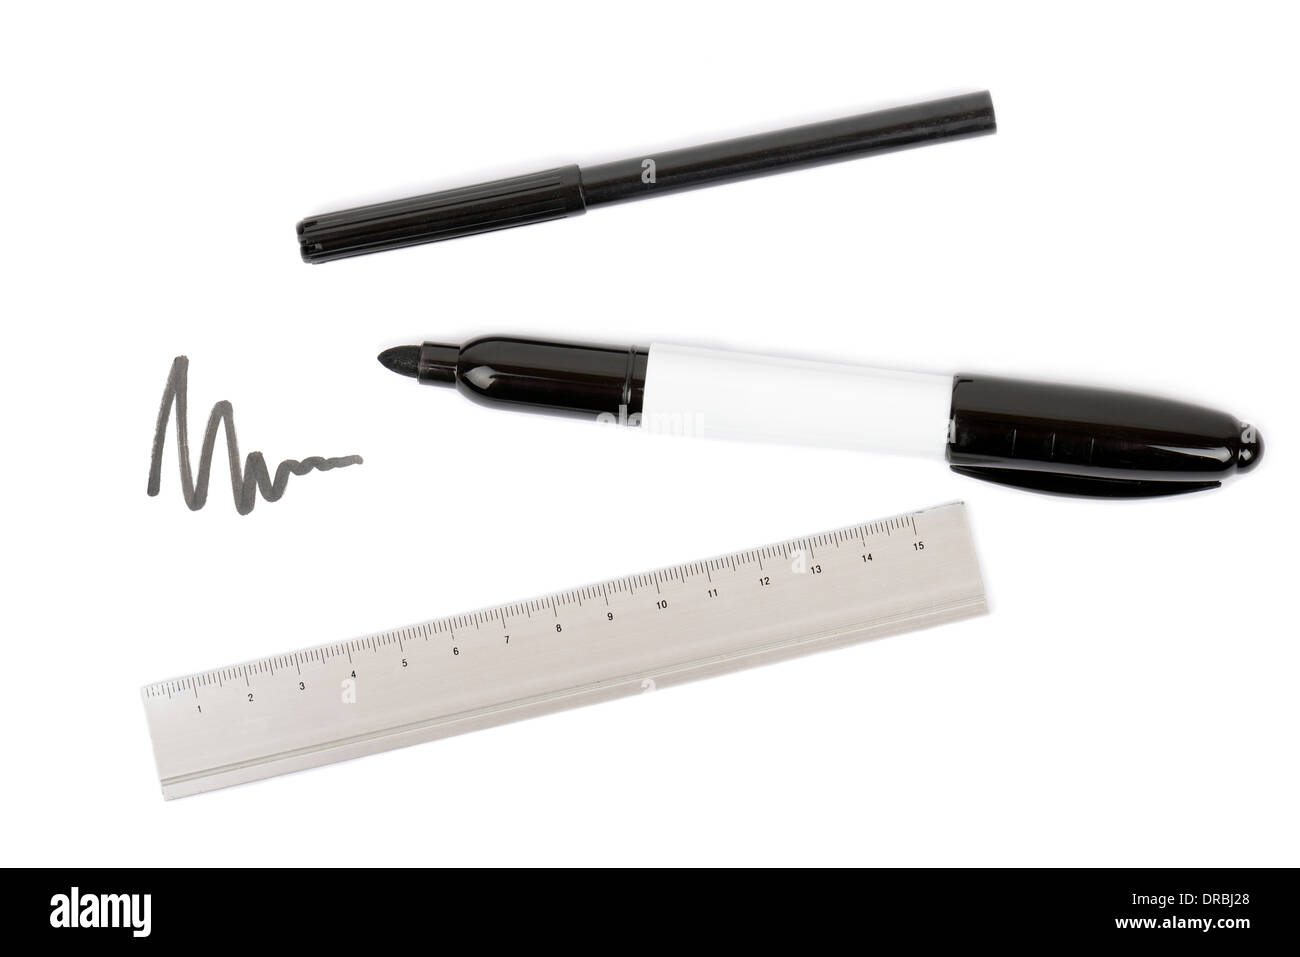 drawing equipmet pens and a ruler on a white background Stock Photo